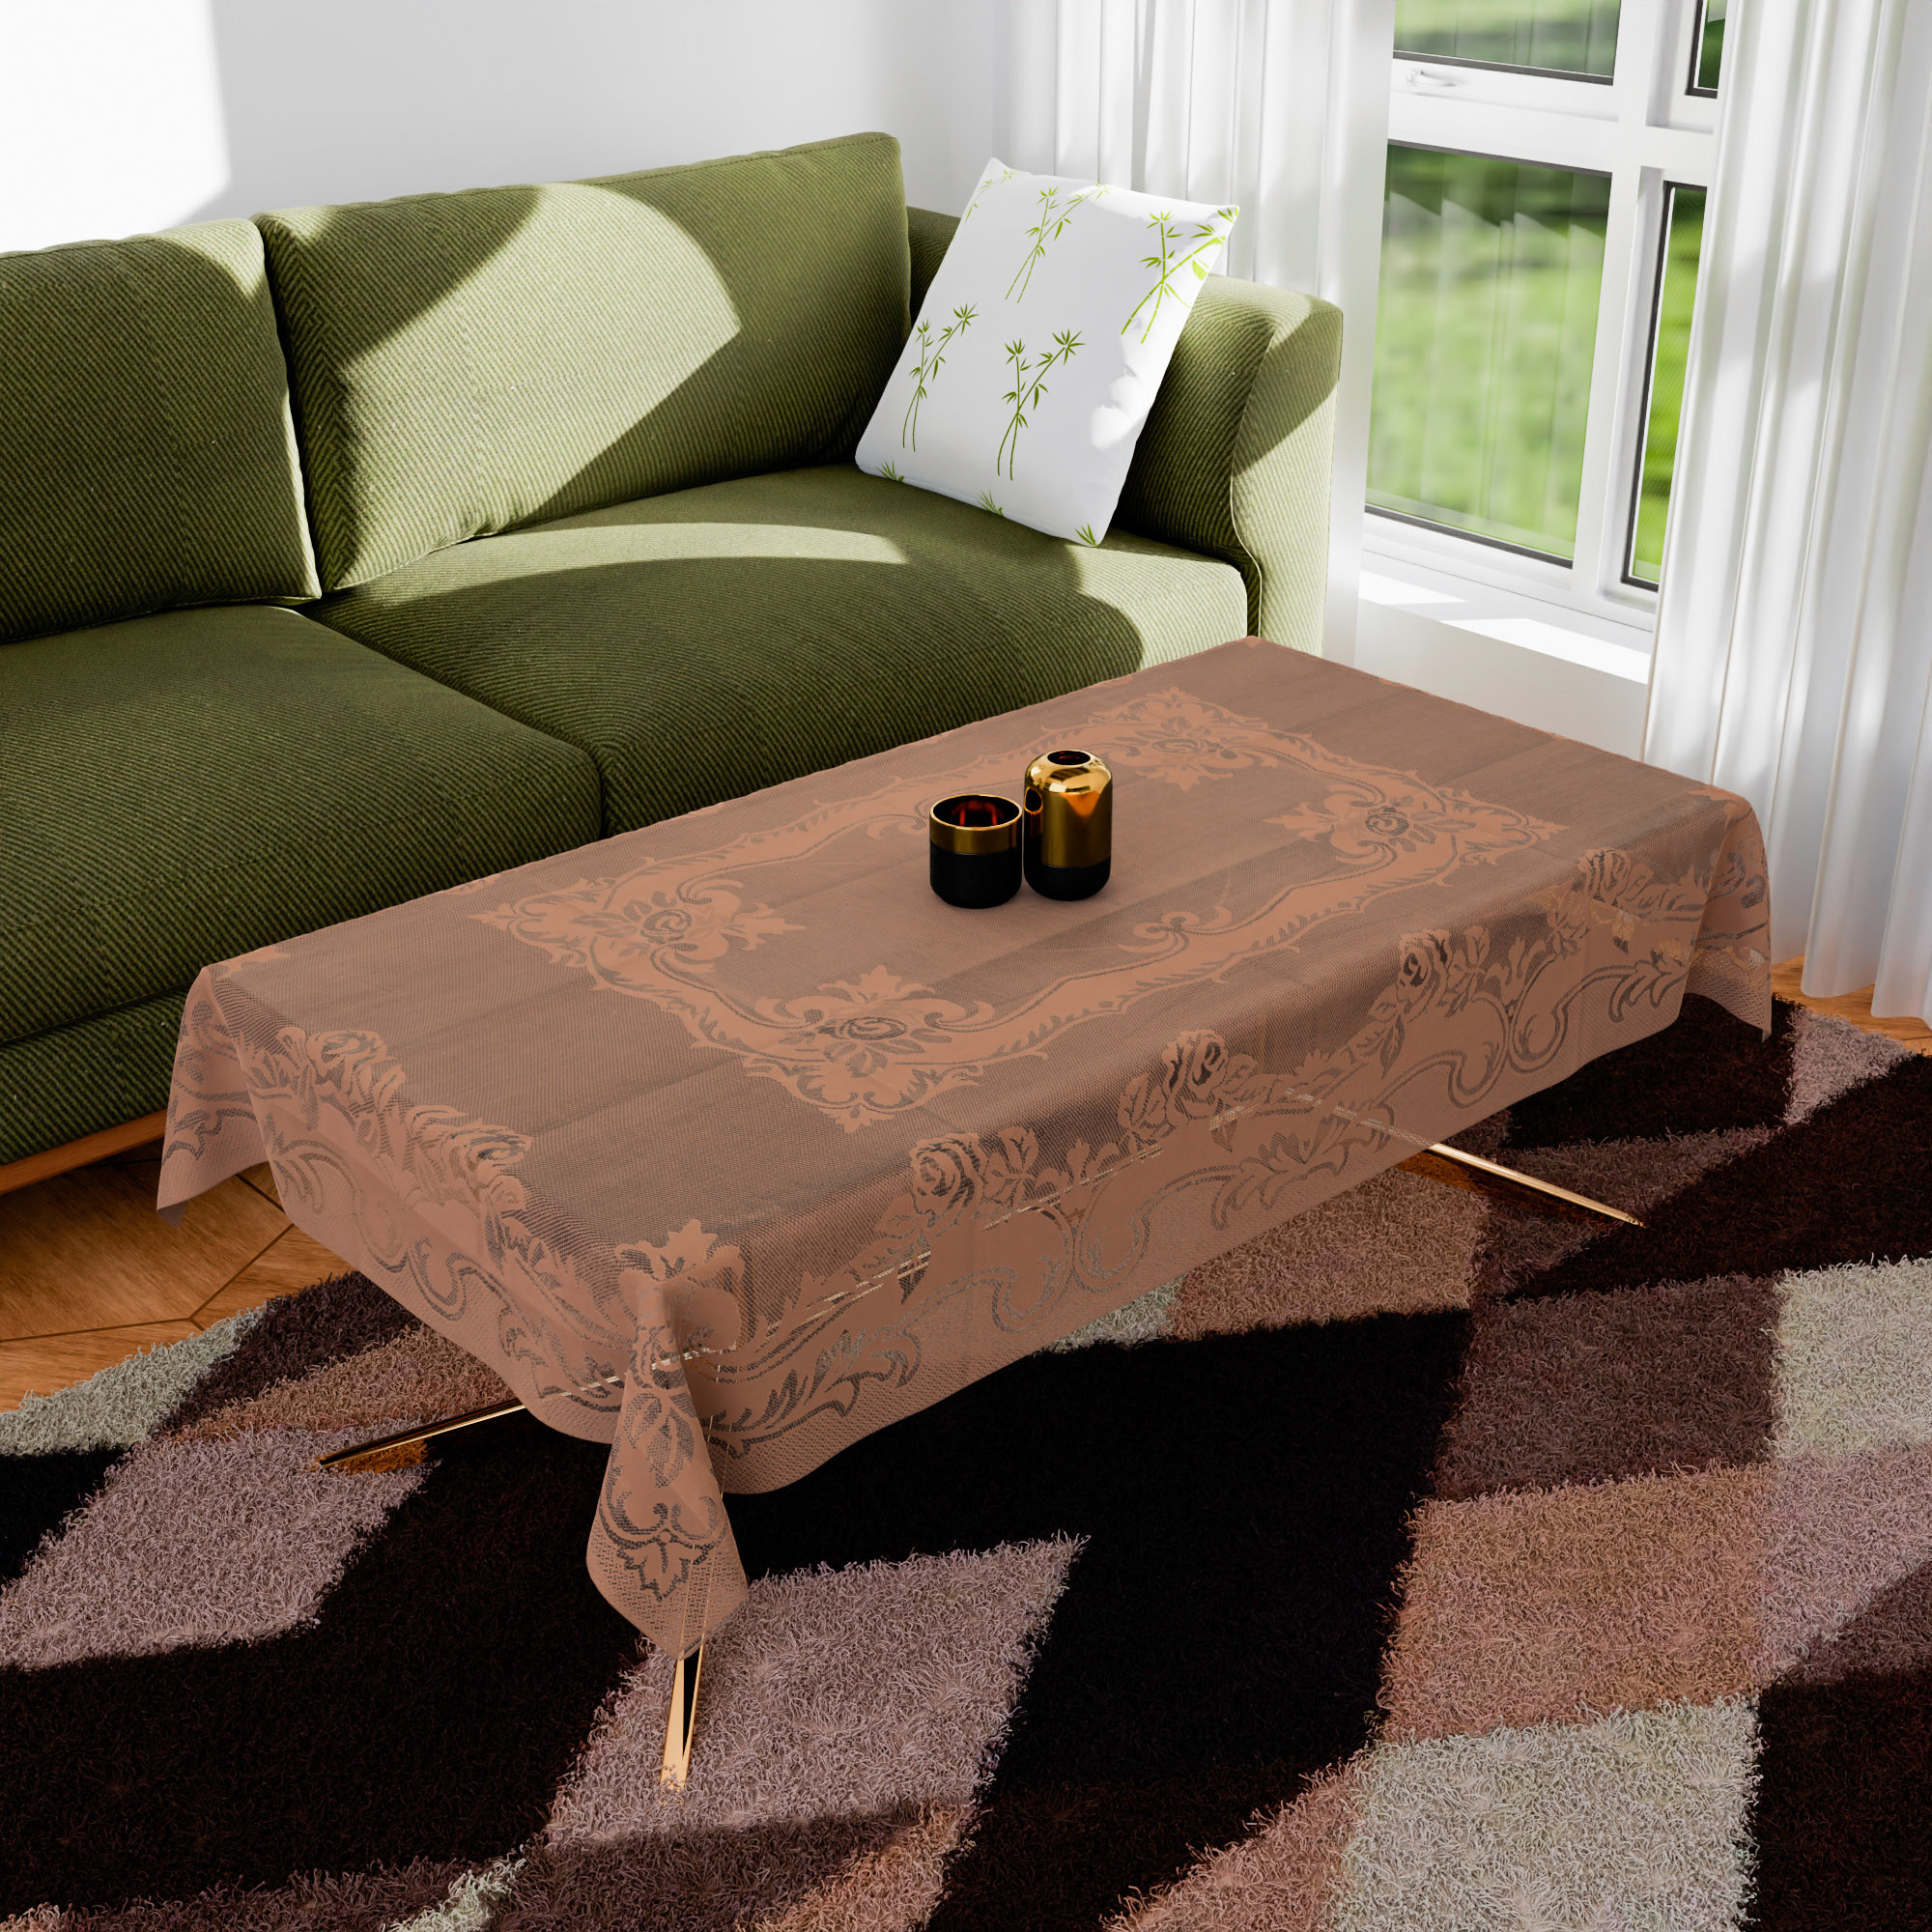 Kuber Industries Center Table Cover | Cotton Table Cloth Cover | 4-Seater Table Cloth | Self Gulmohar Vila Table Cover | Table Protector | Table Cover for Center Table | 40x60 Inch | Peach